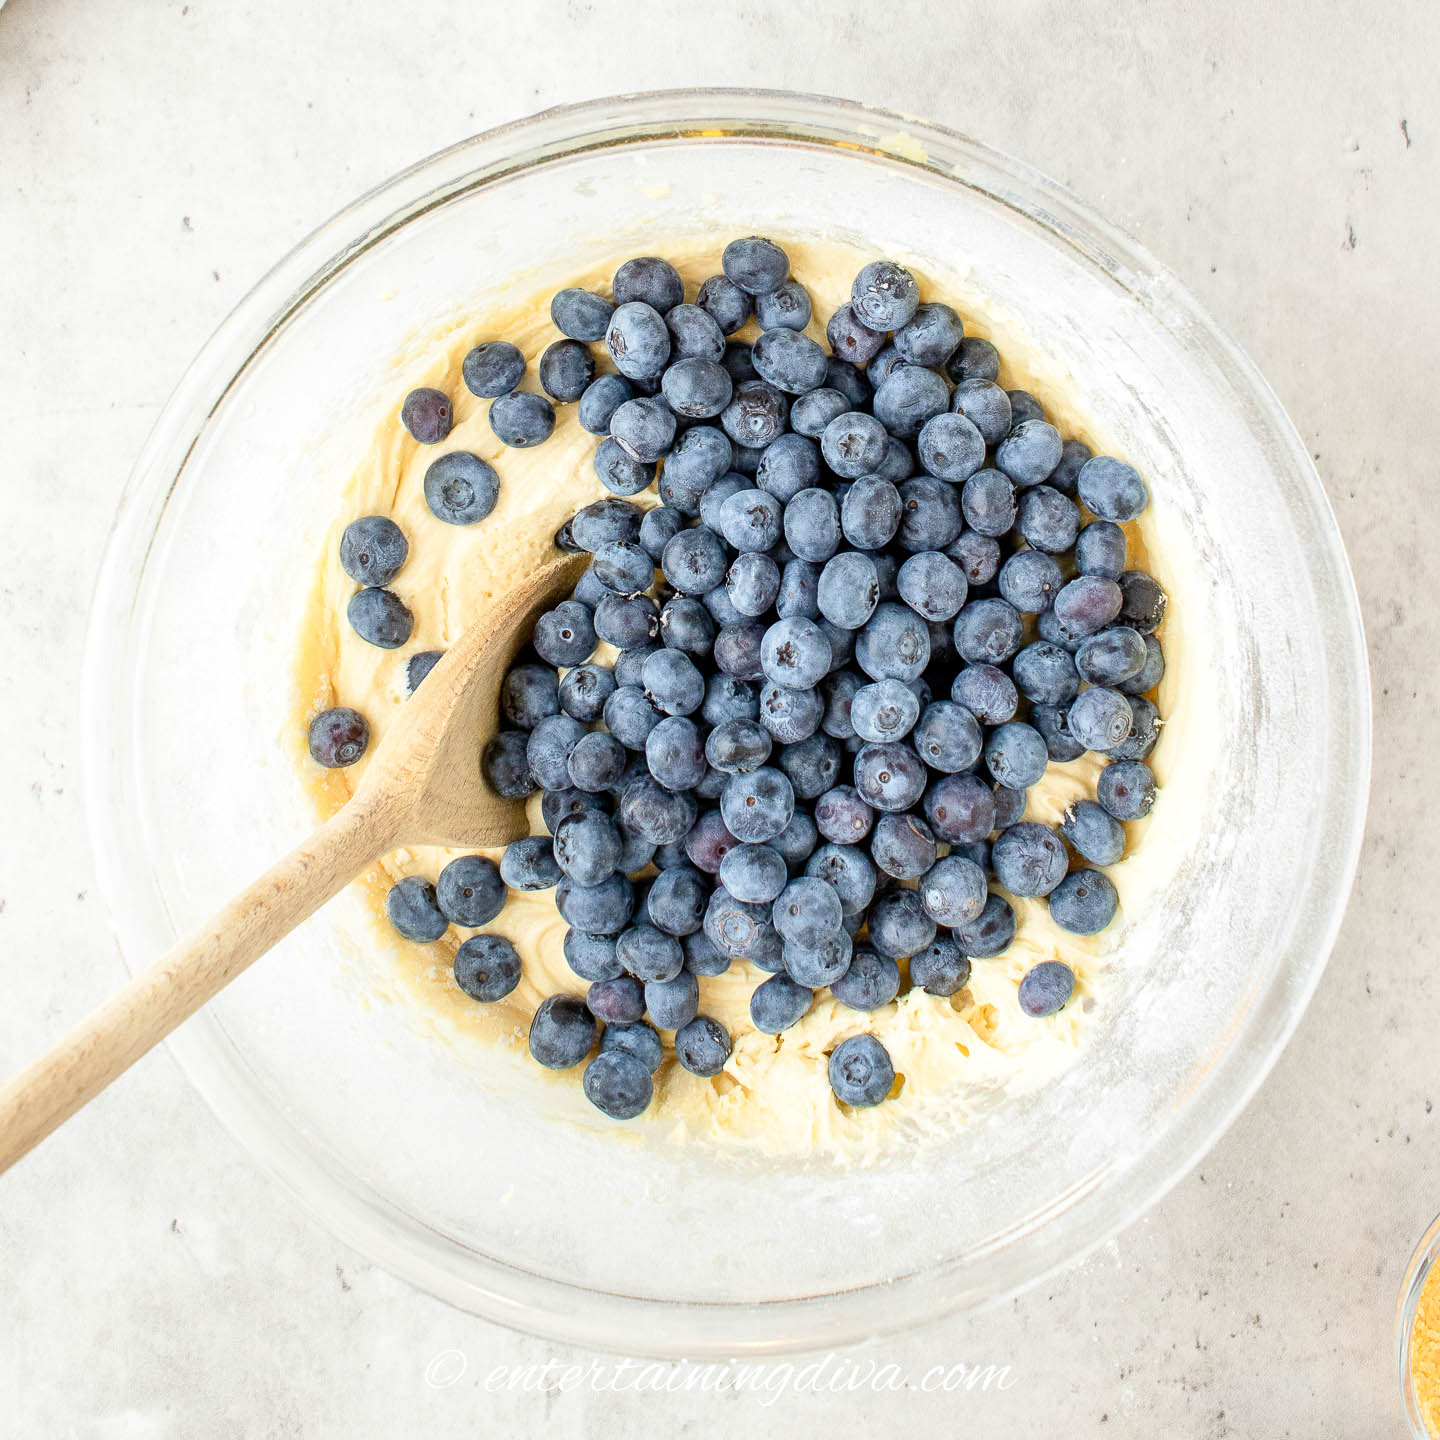 muffin batter with blueberries in a bowl